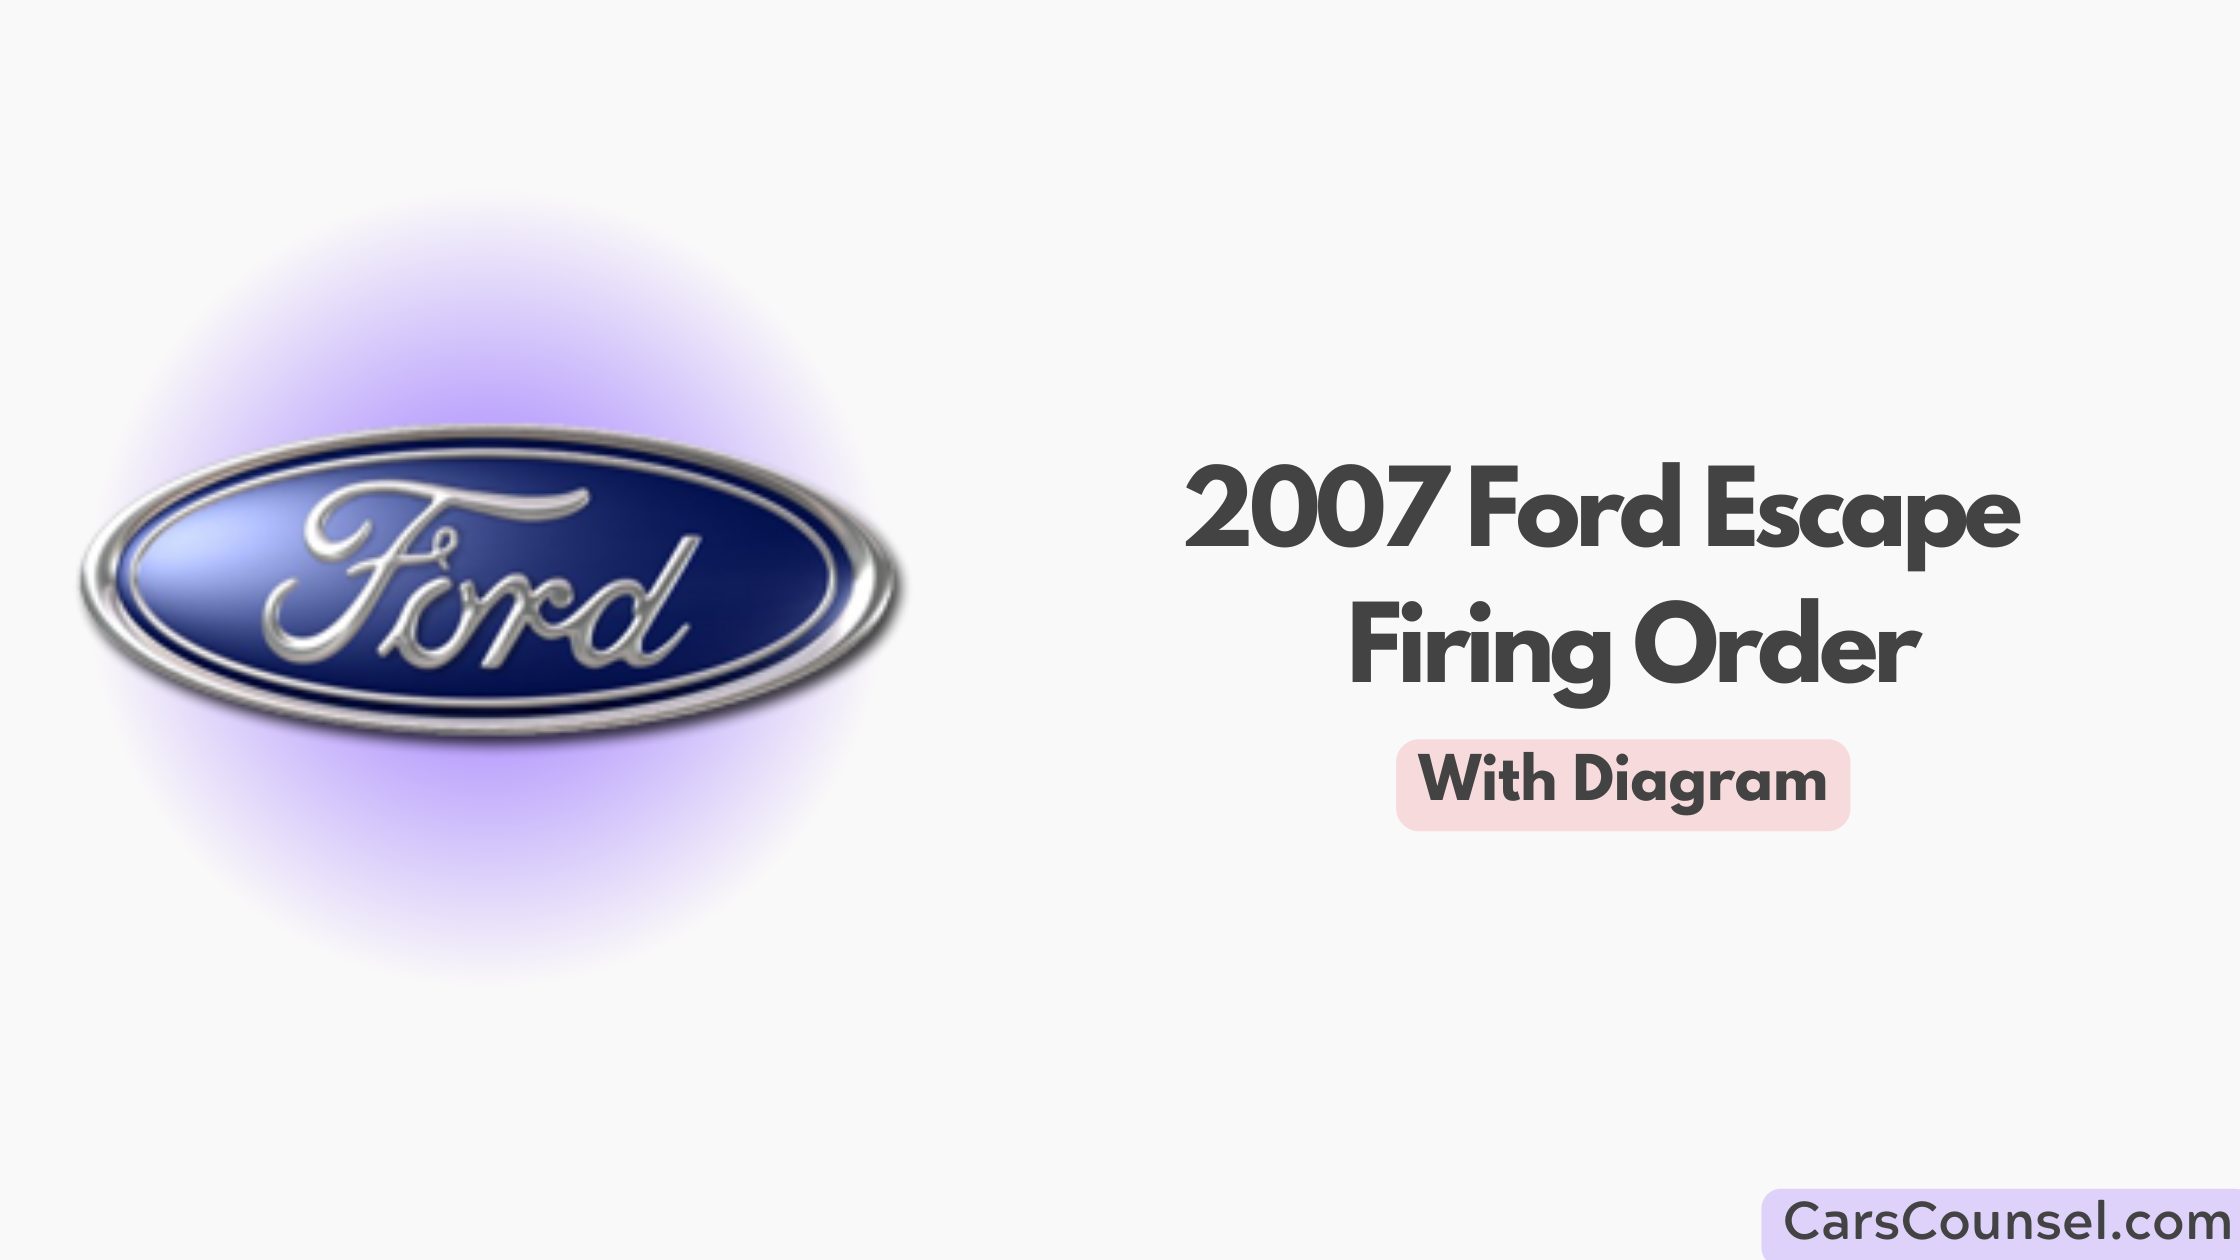 2007 Ford Escape Firing Order With Diagram